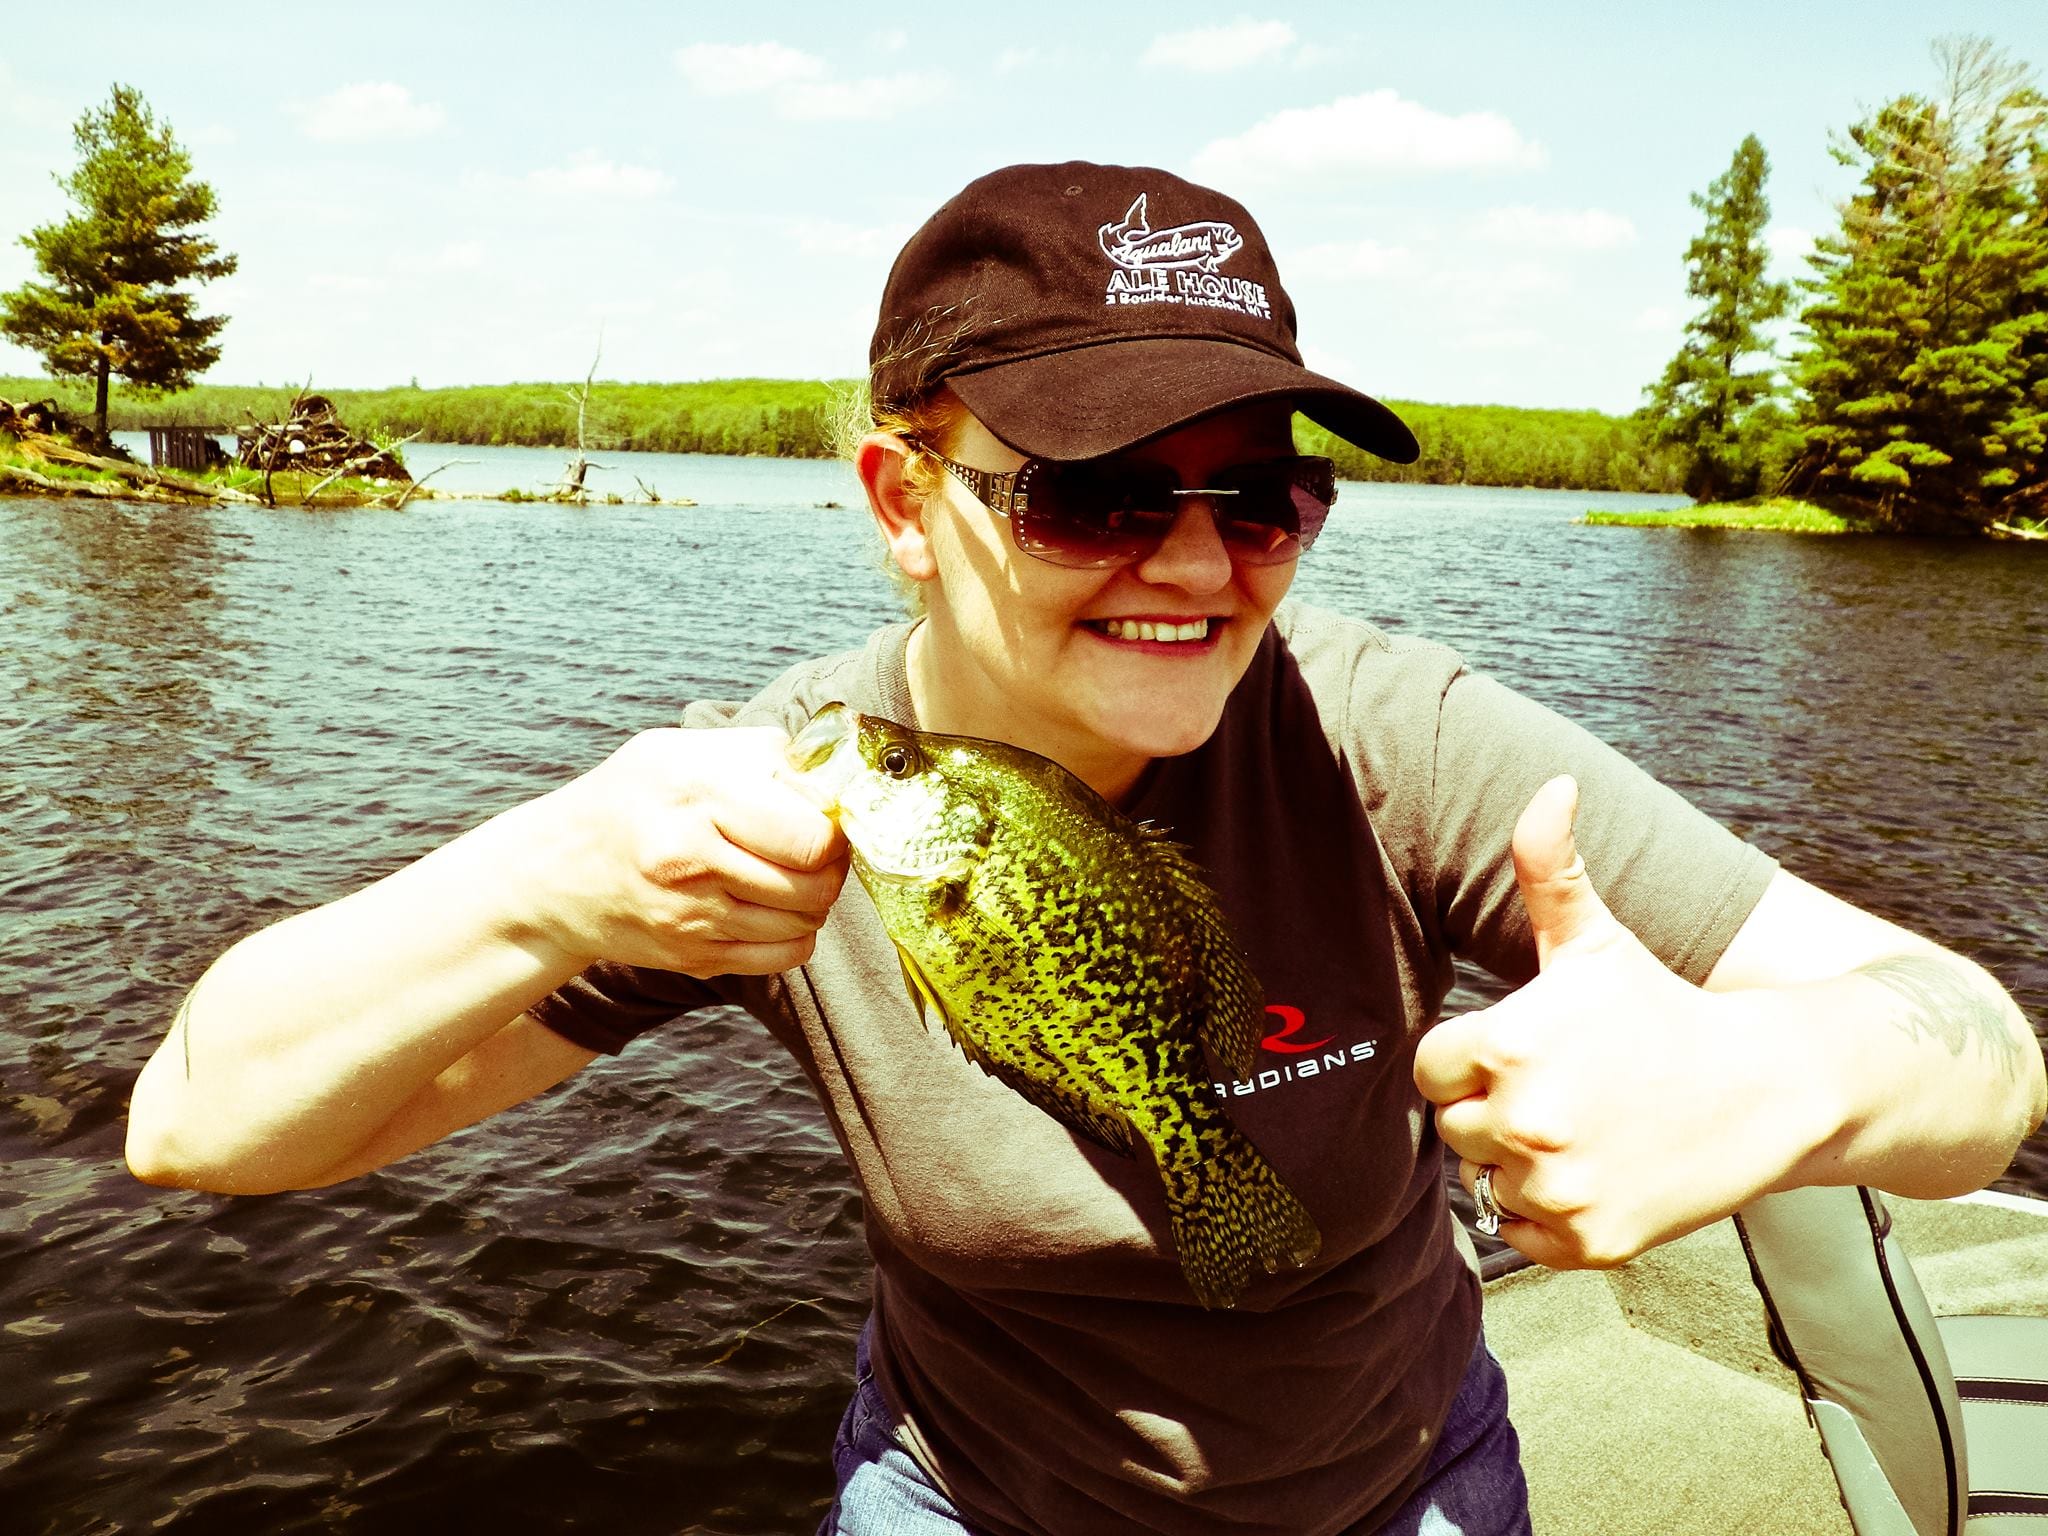 Carrie had fun catching crappies.